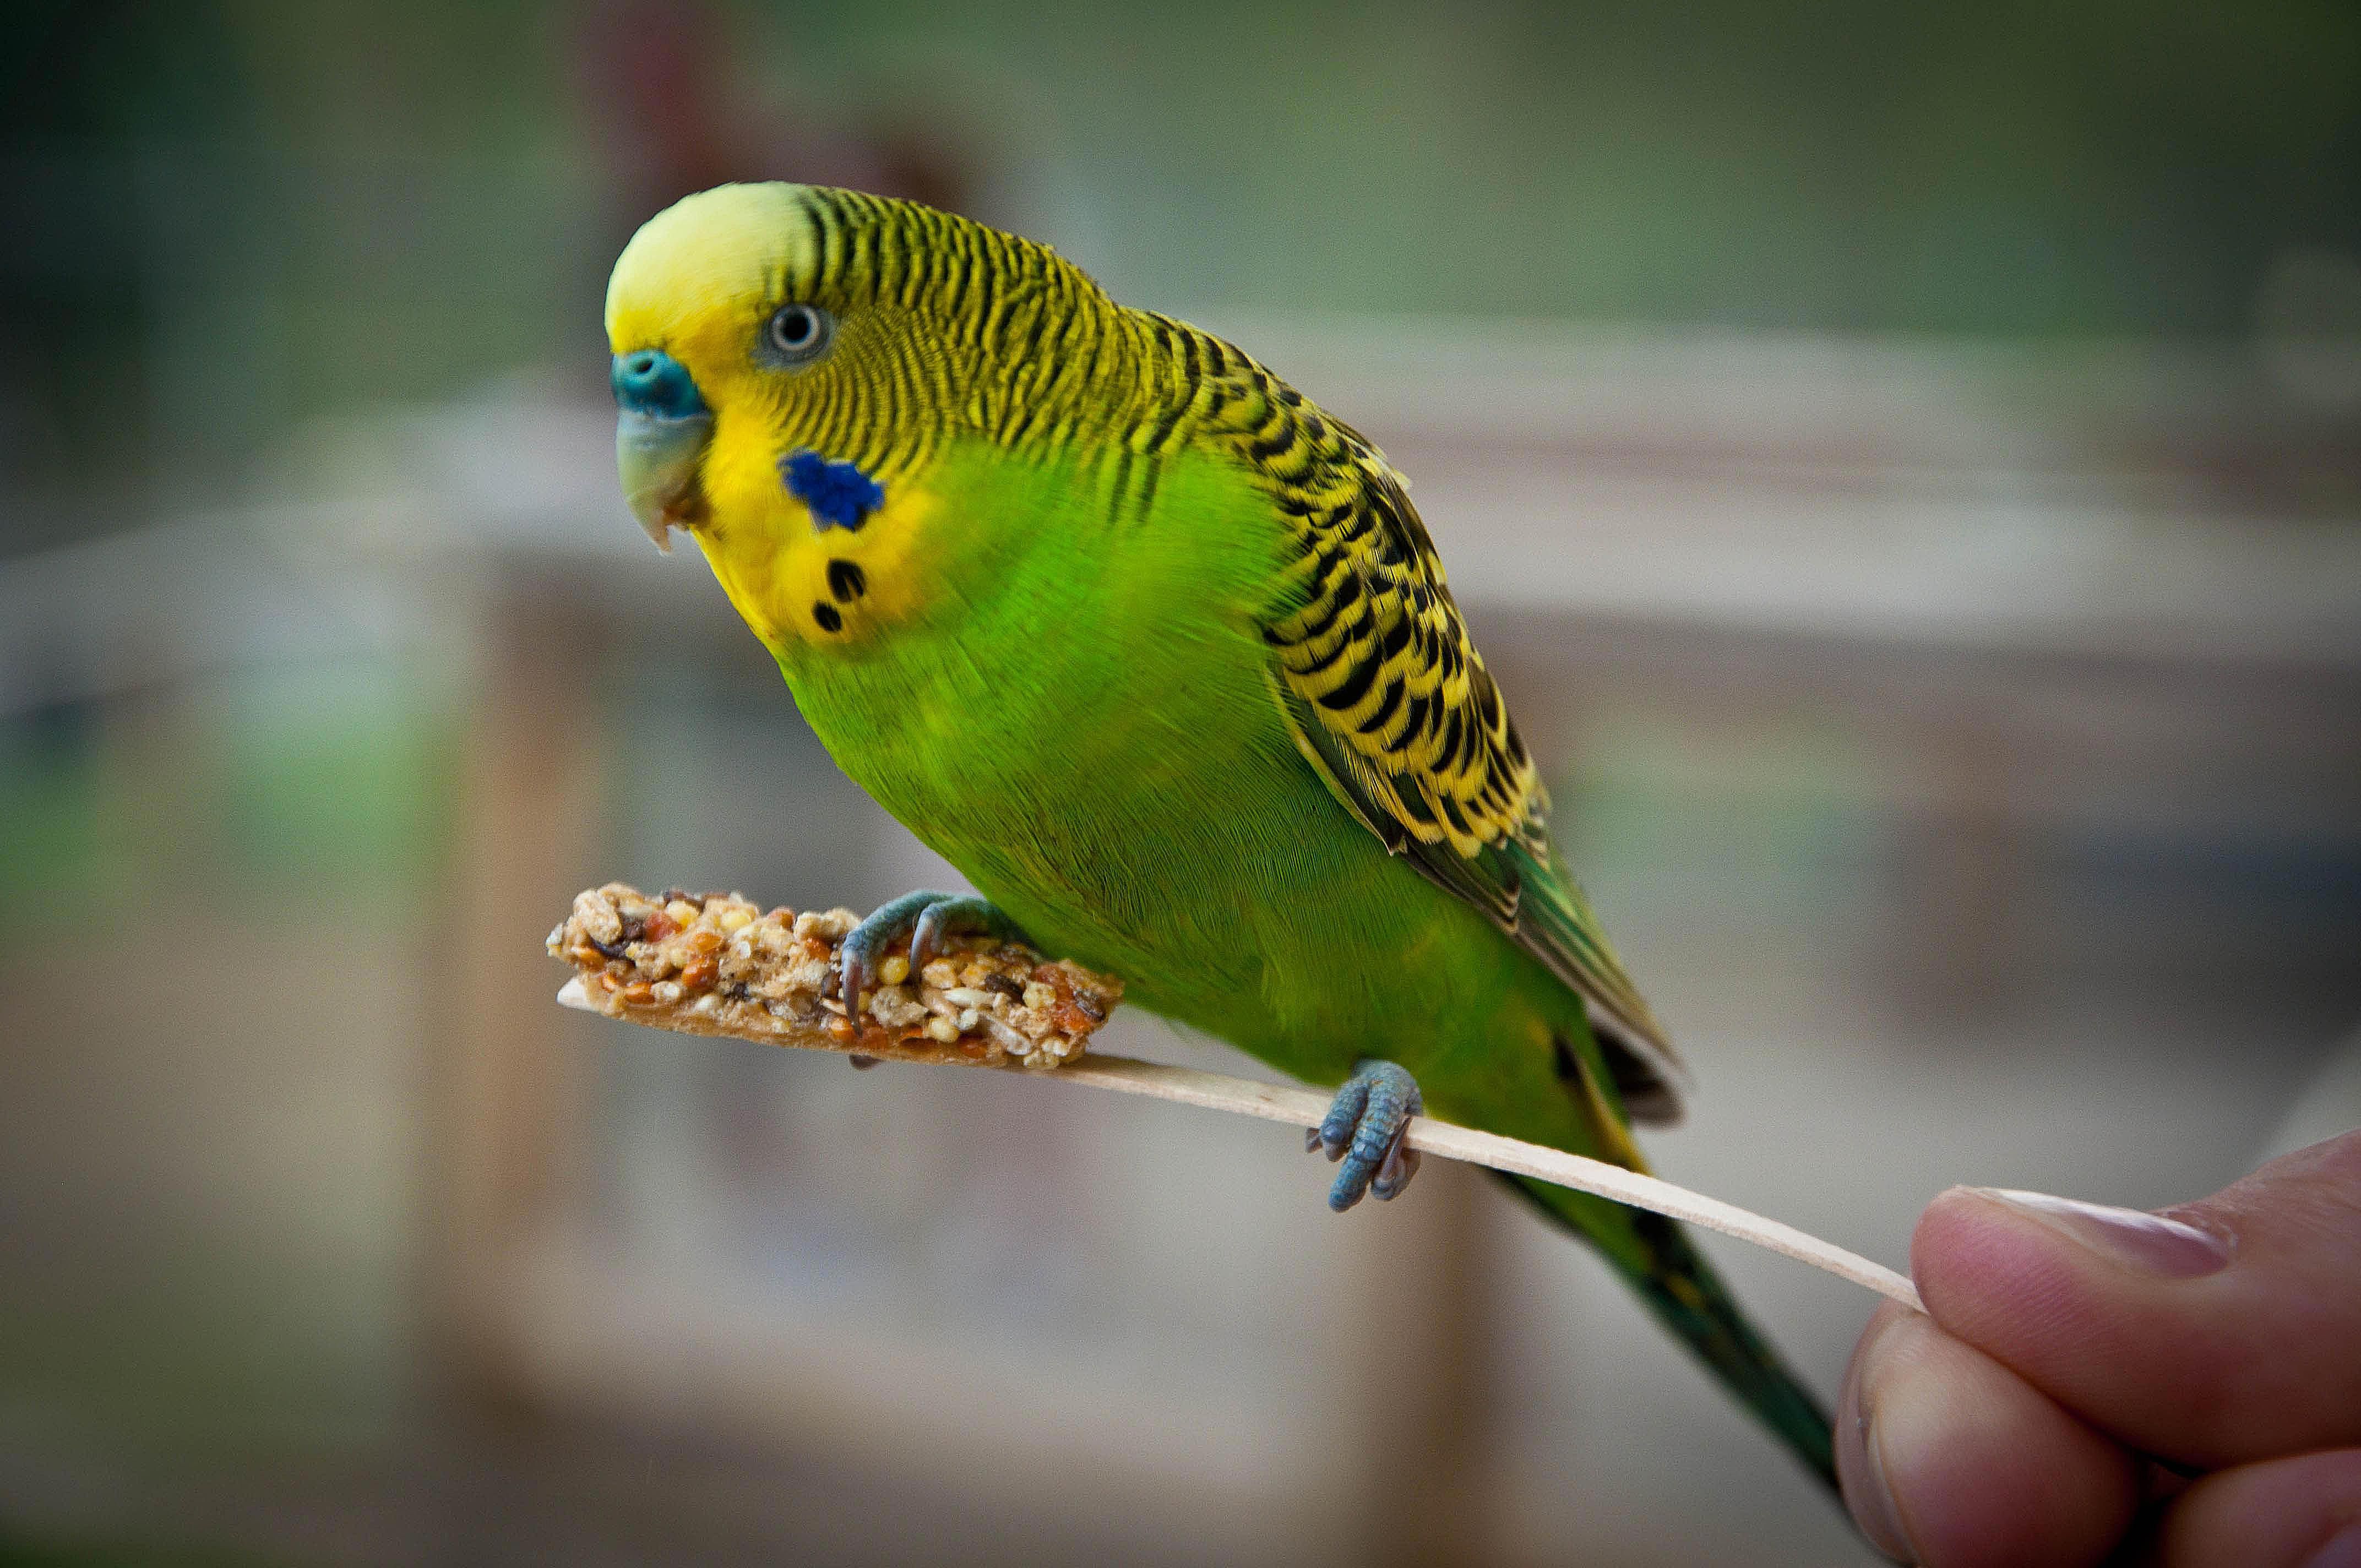 Budgie at Franklin Park Zoo